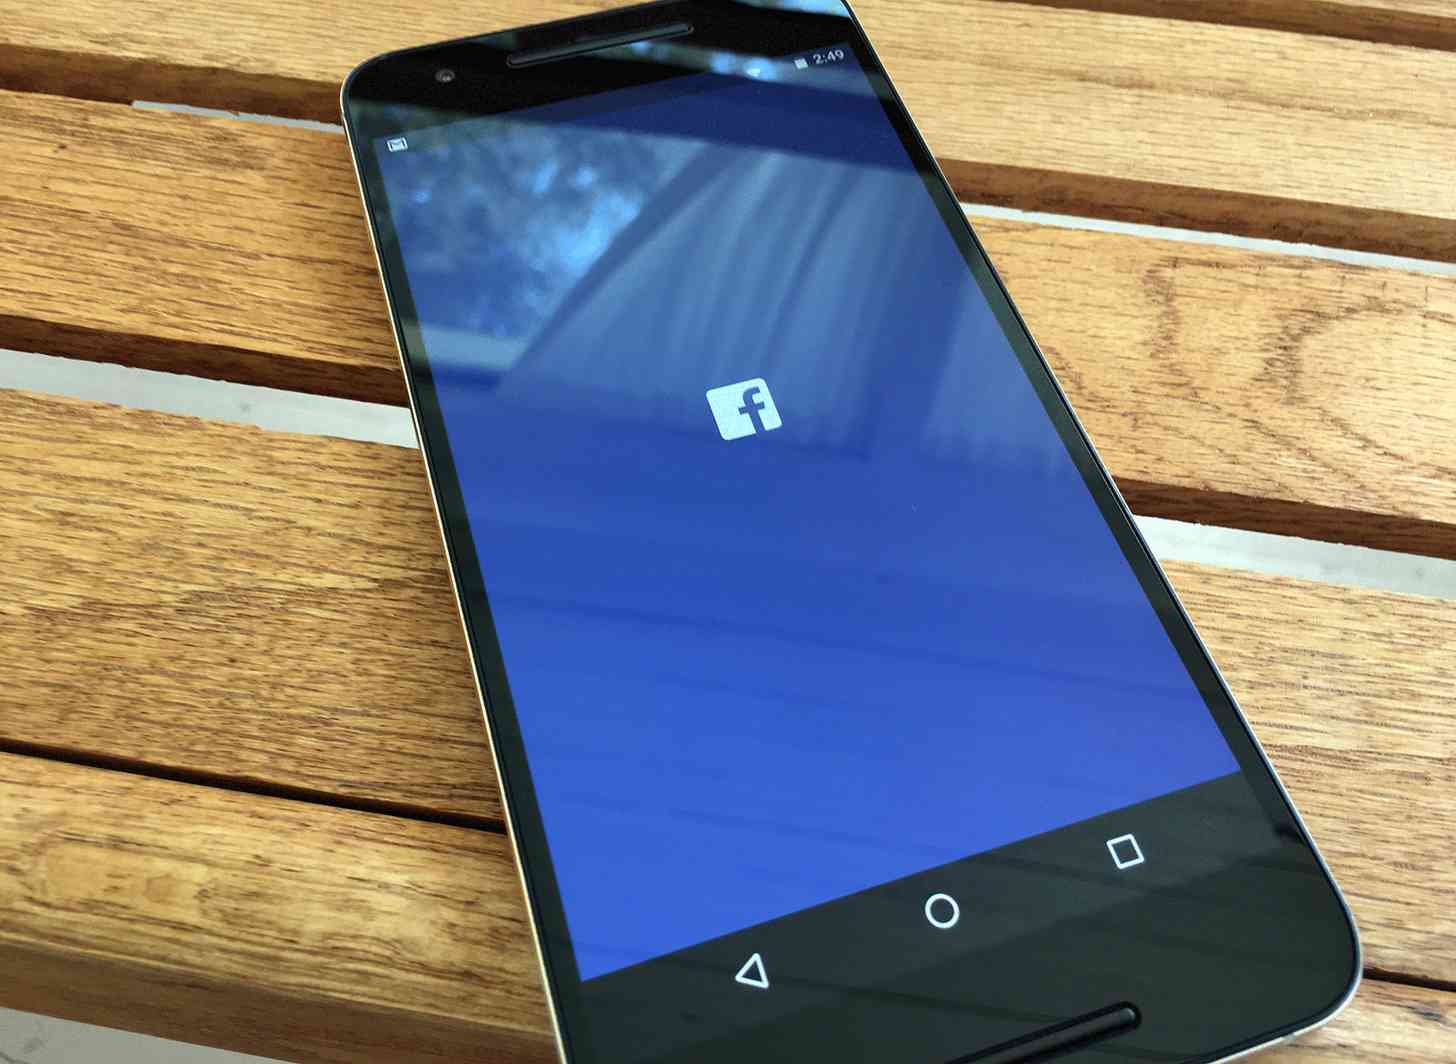 Facebook Android app